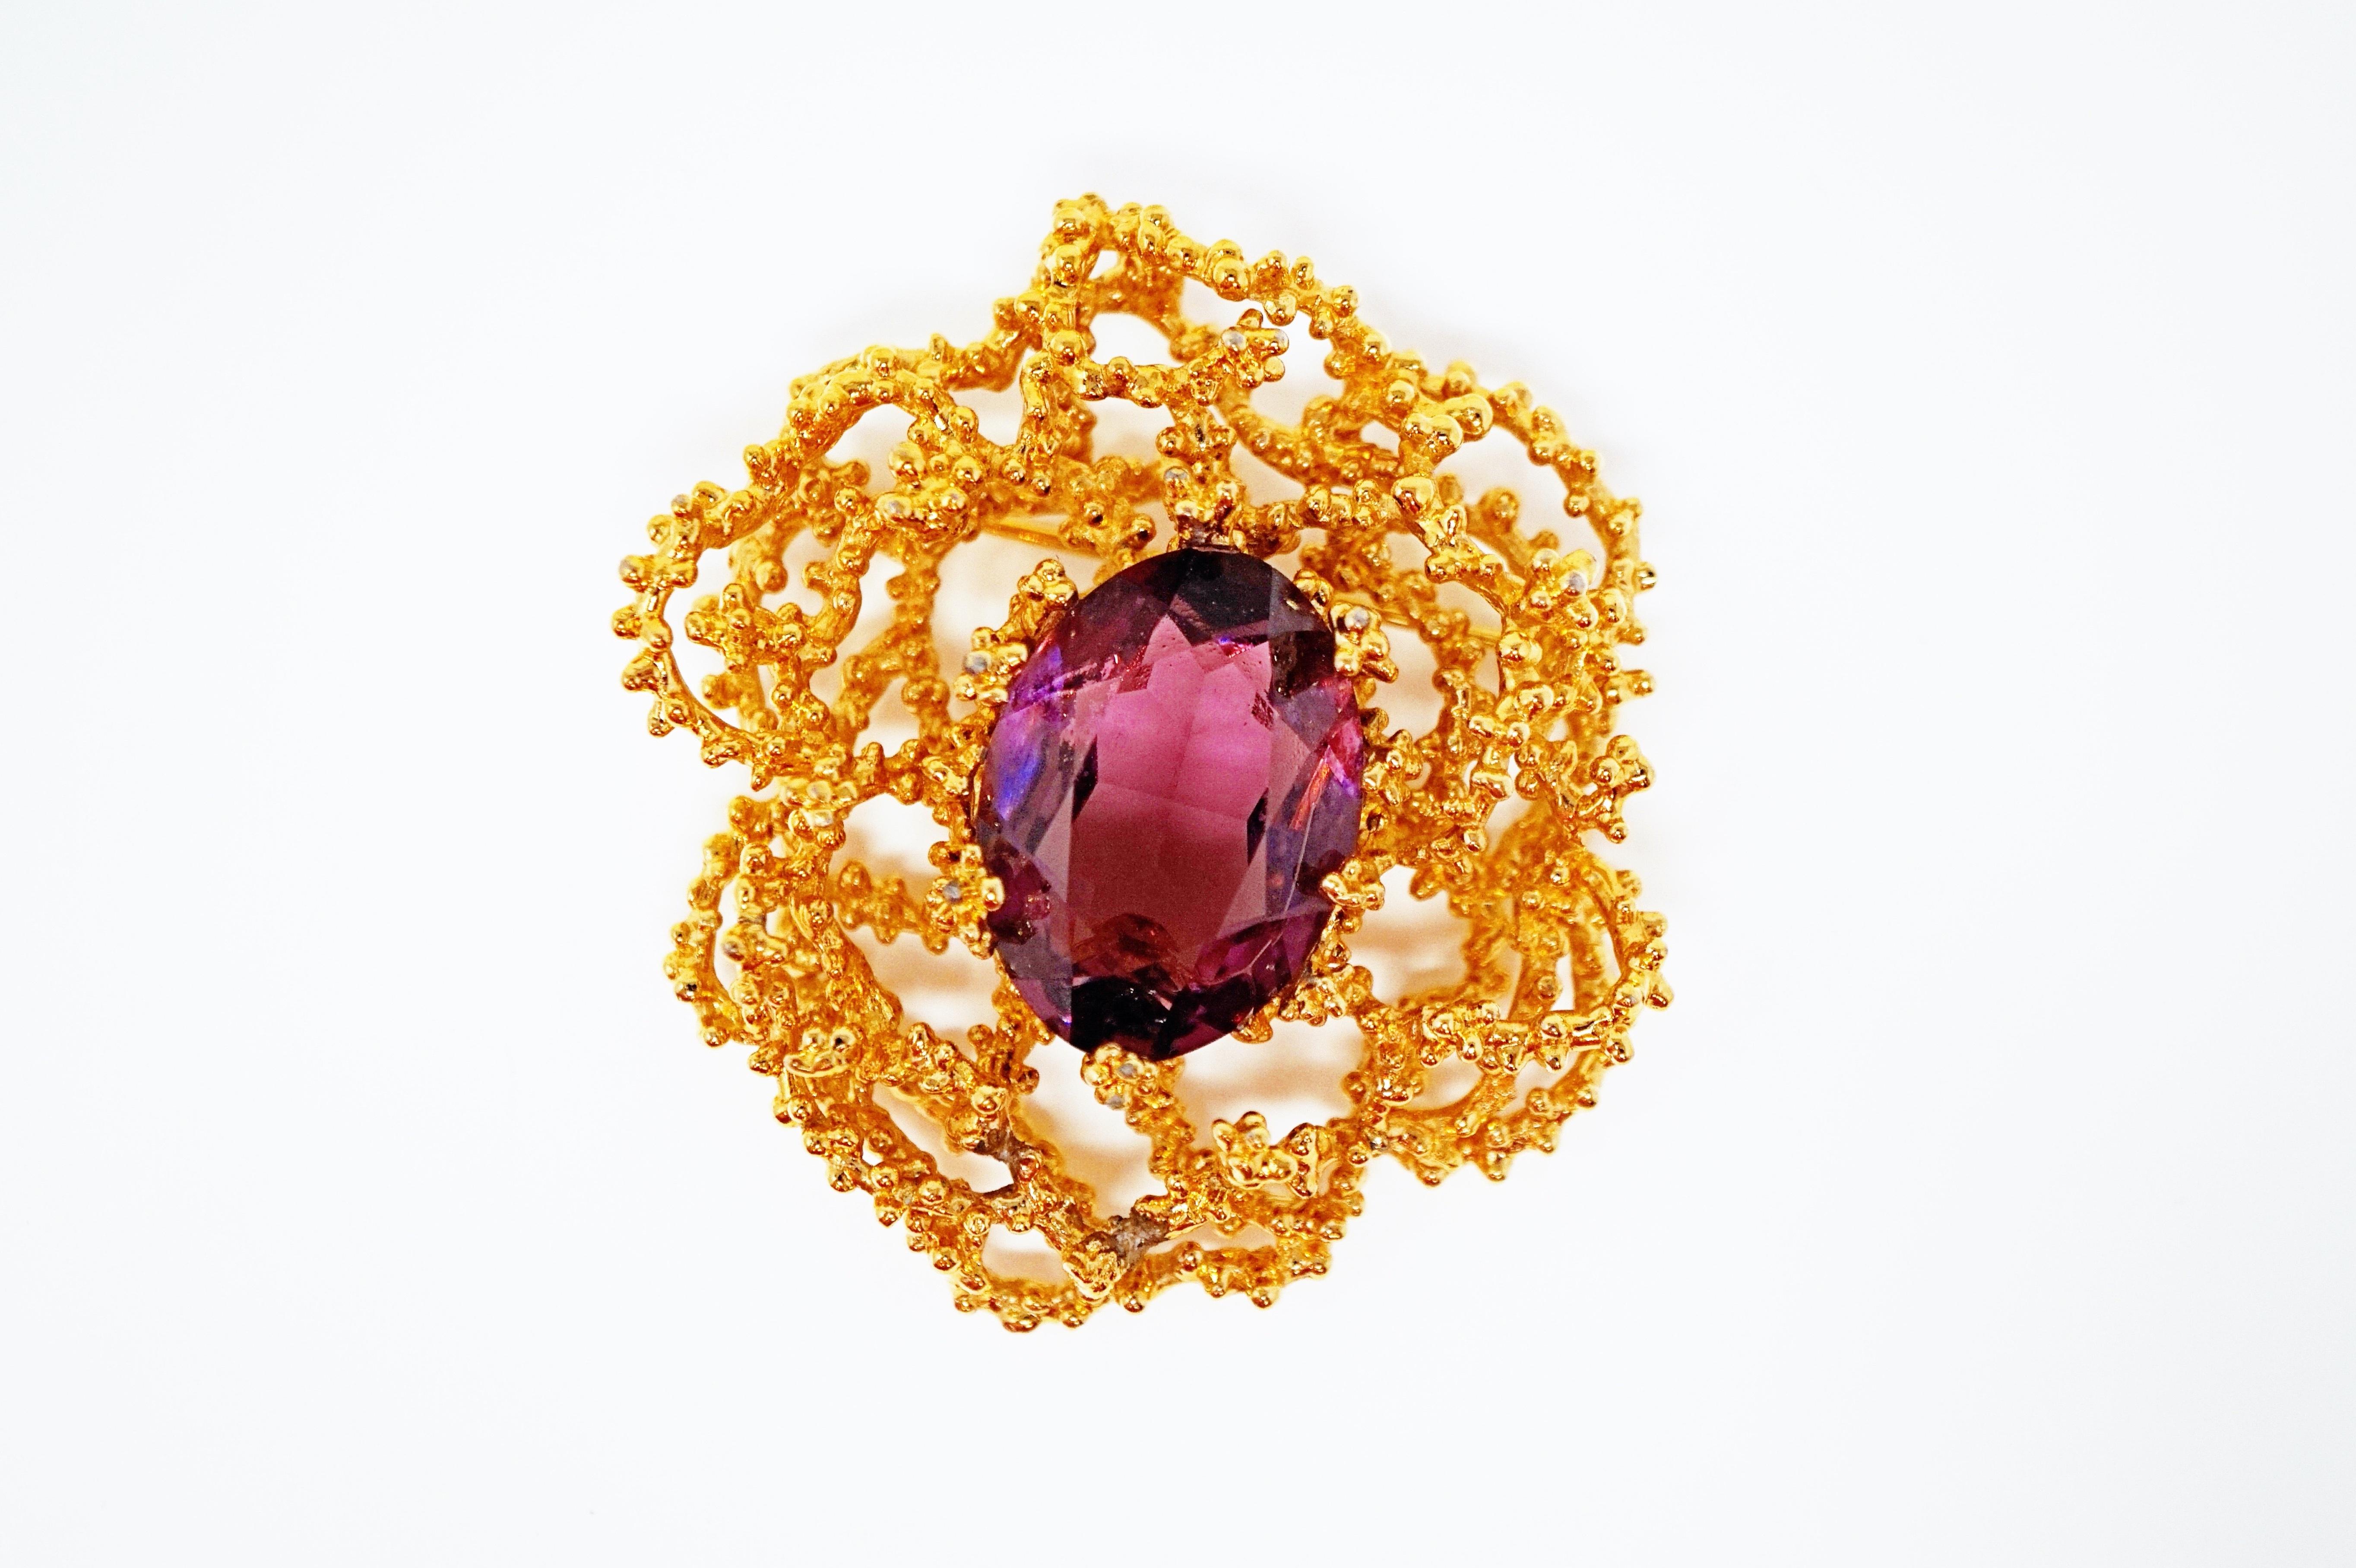 Exquisite gilt Brutalist-style abstract modern brooch with faceted Amethyst-colored crystal centerpiece by Panetta, circa 1960.  

Gold-plated metal combined with sparkling deep purple crystal create a bold look that is just as on trend today as it